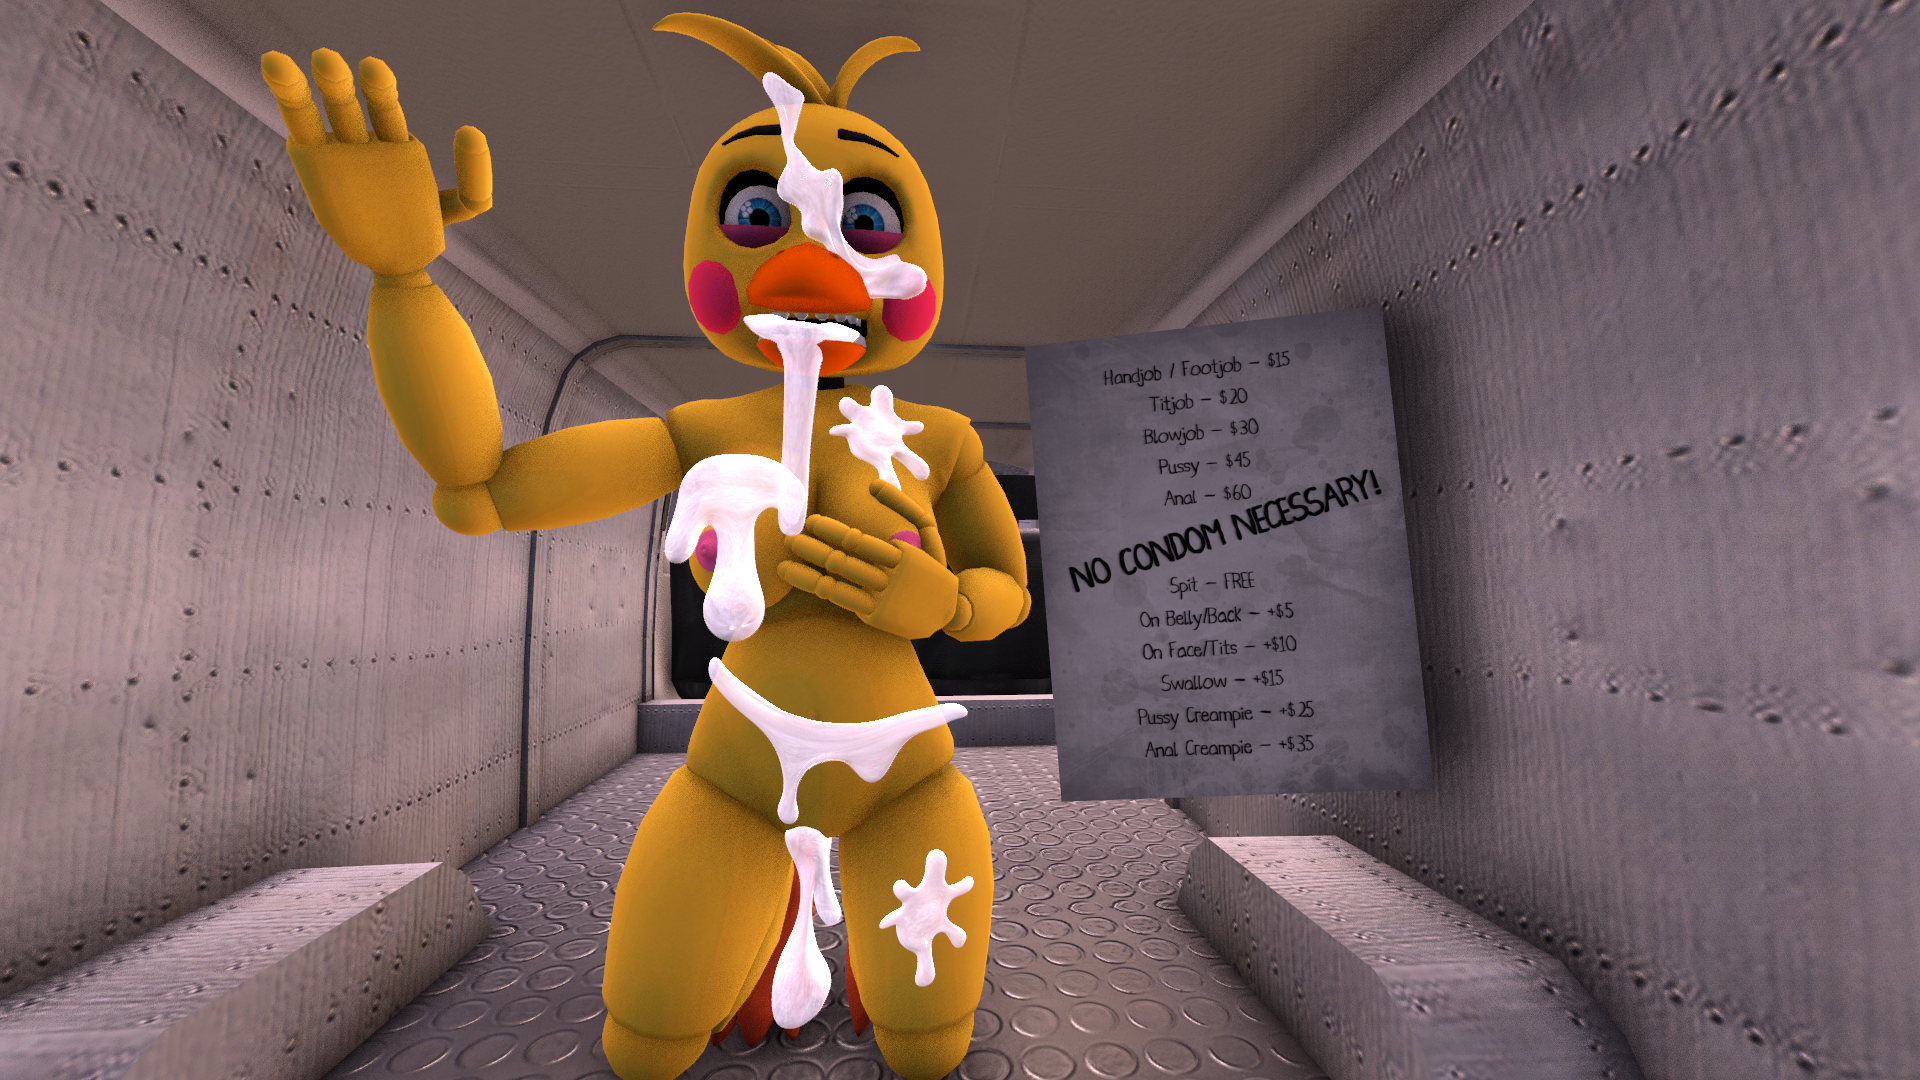 Anime F Naf Sfm Porn Tits - Post 1878879: Five_Nights_at_Freddy's Source_Filmmaker Toy_Chica XboxKing37